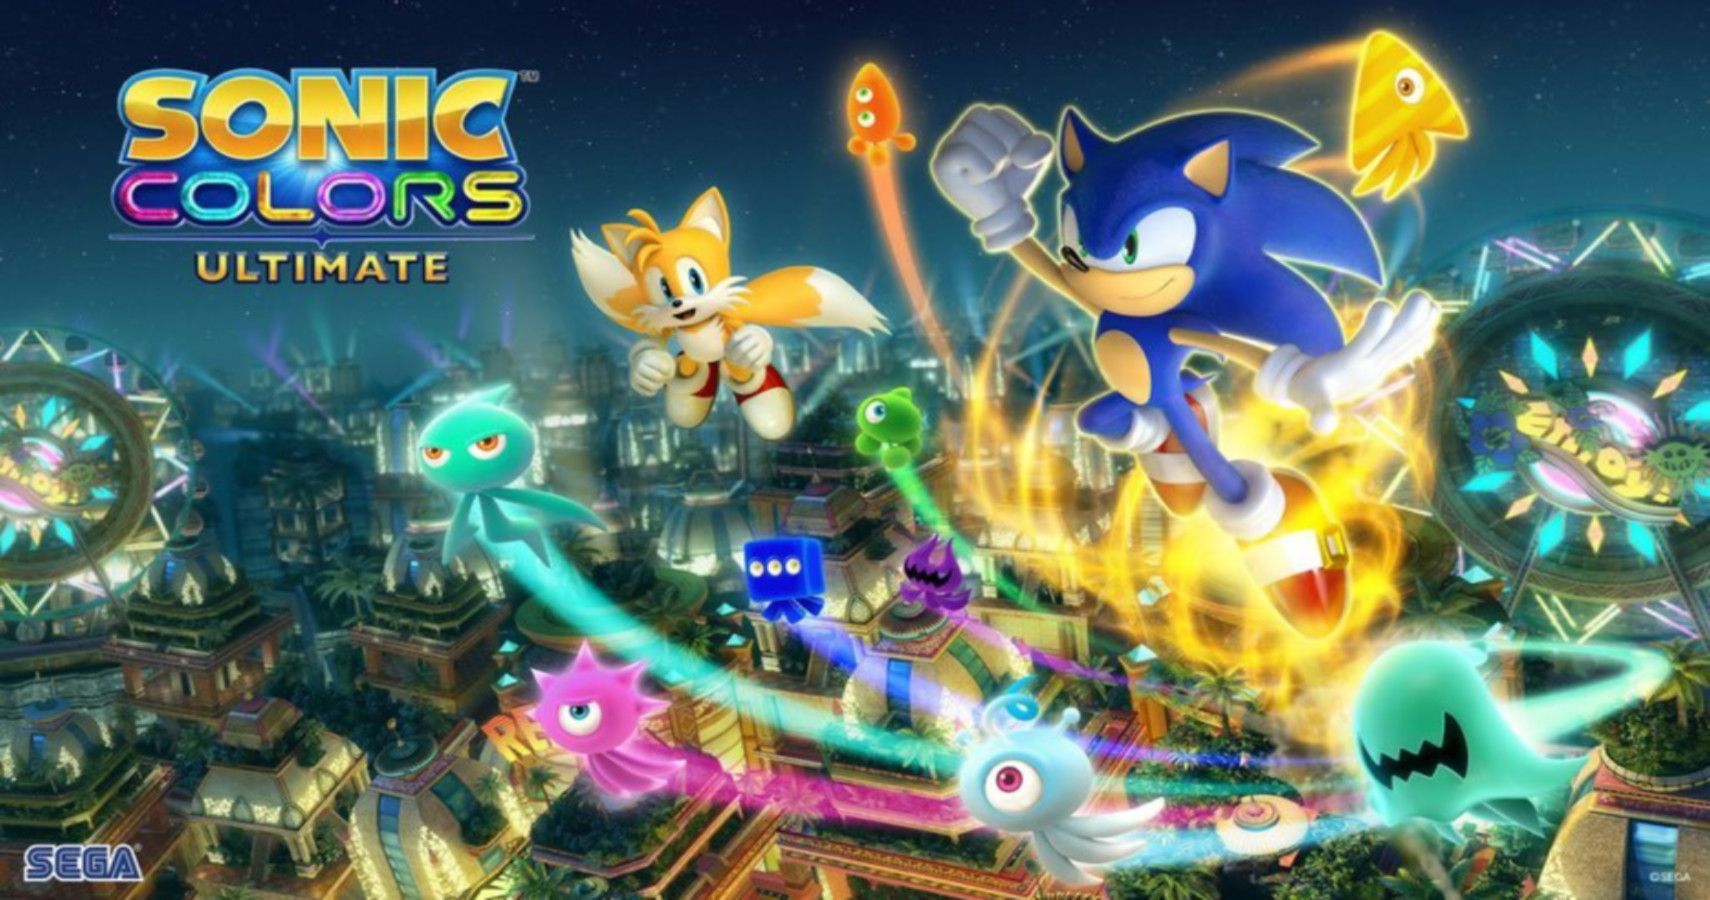 Sonic Colors: Ultimate on Steam